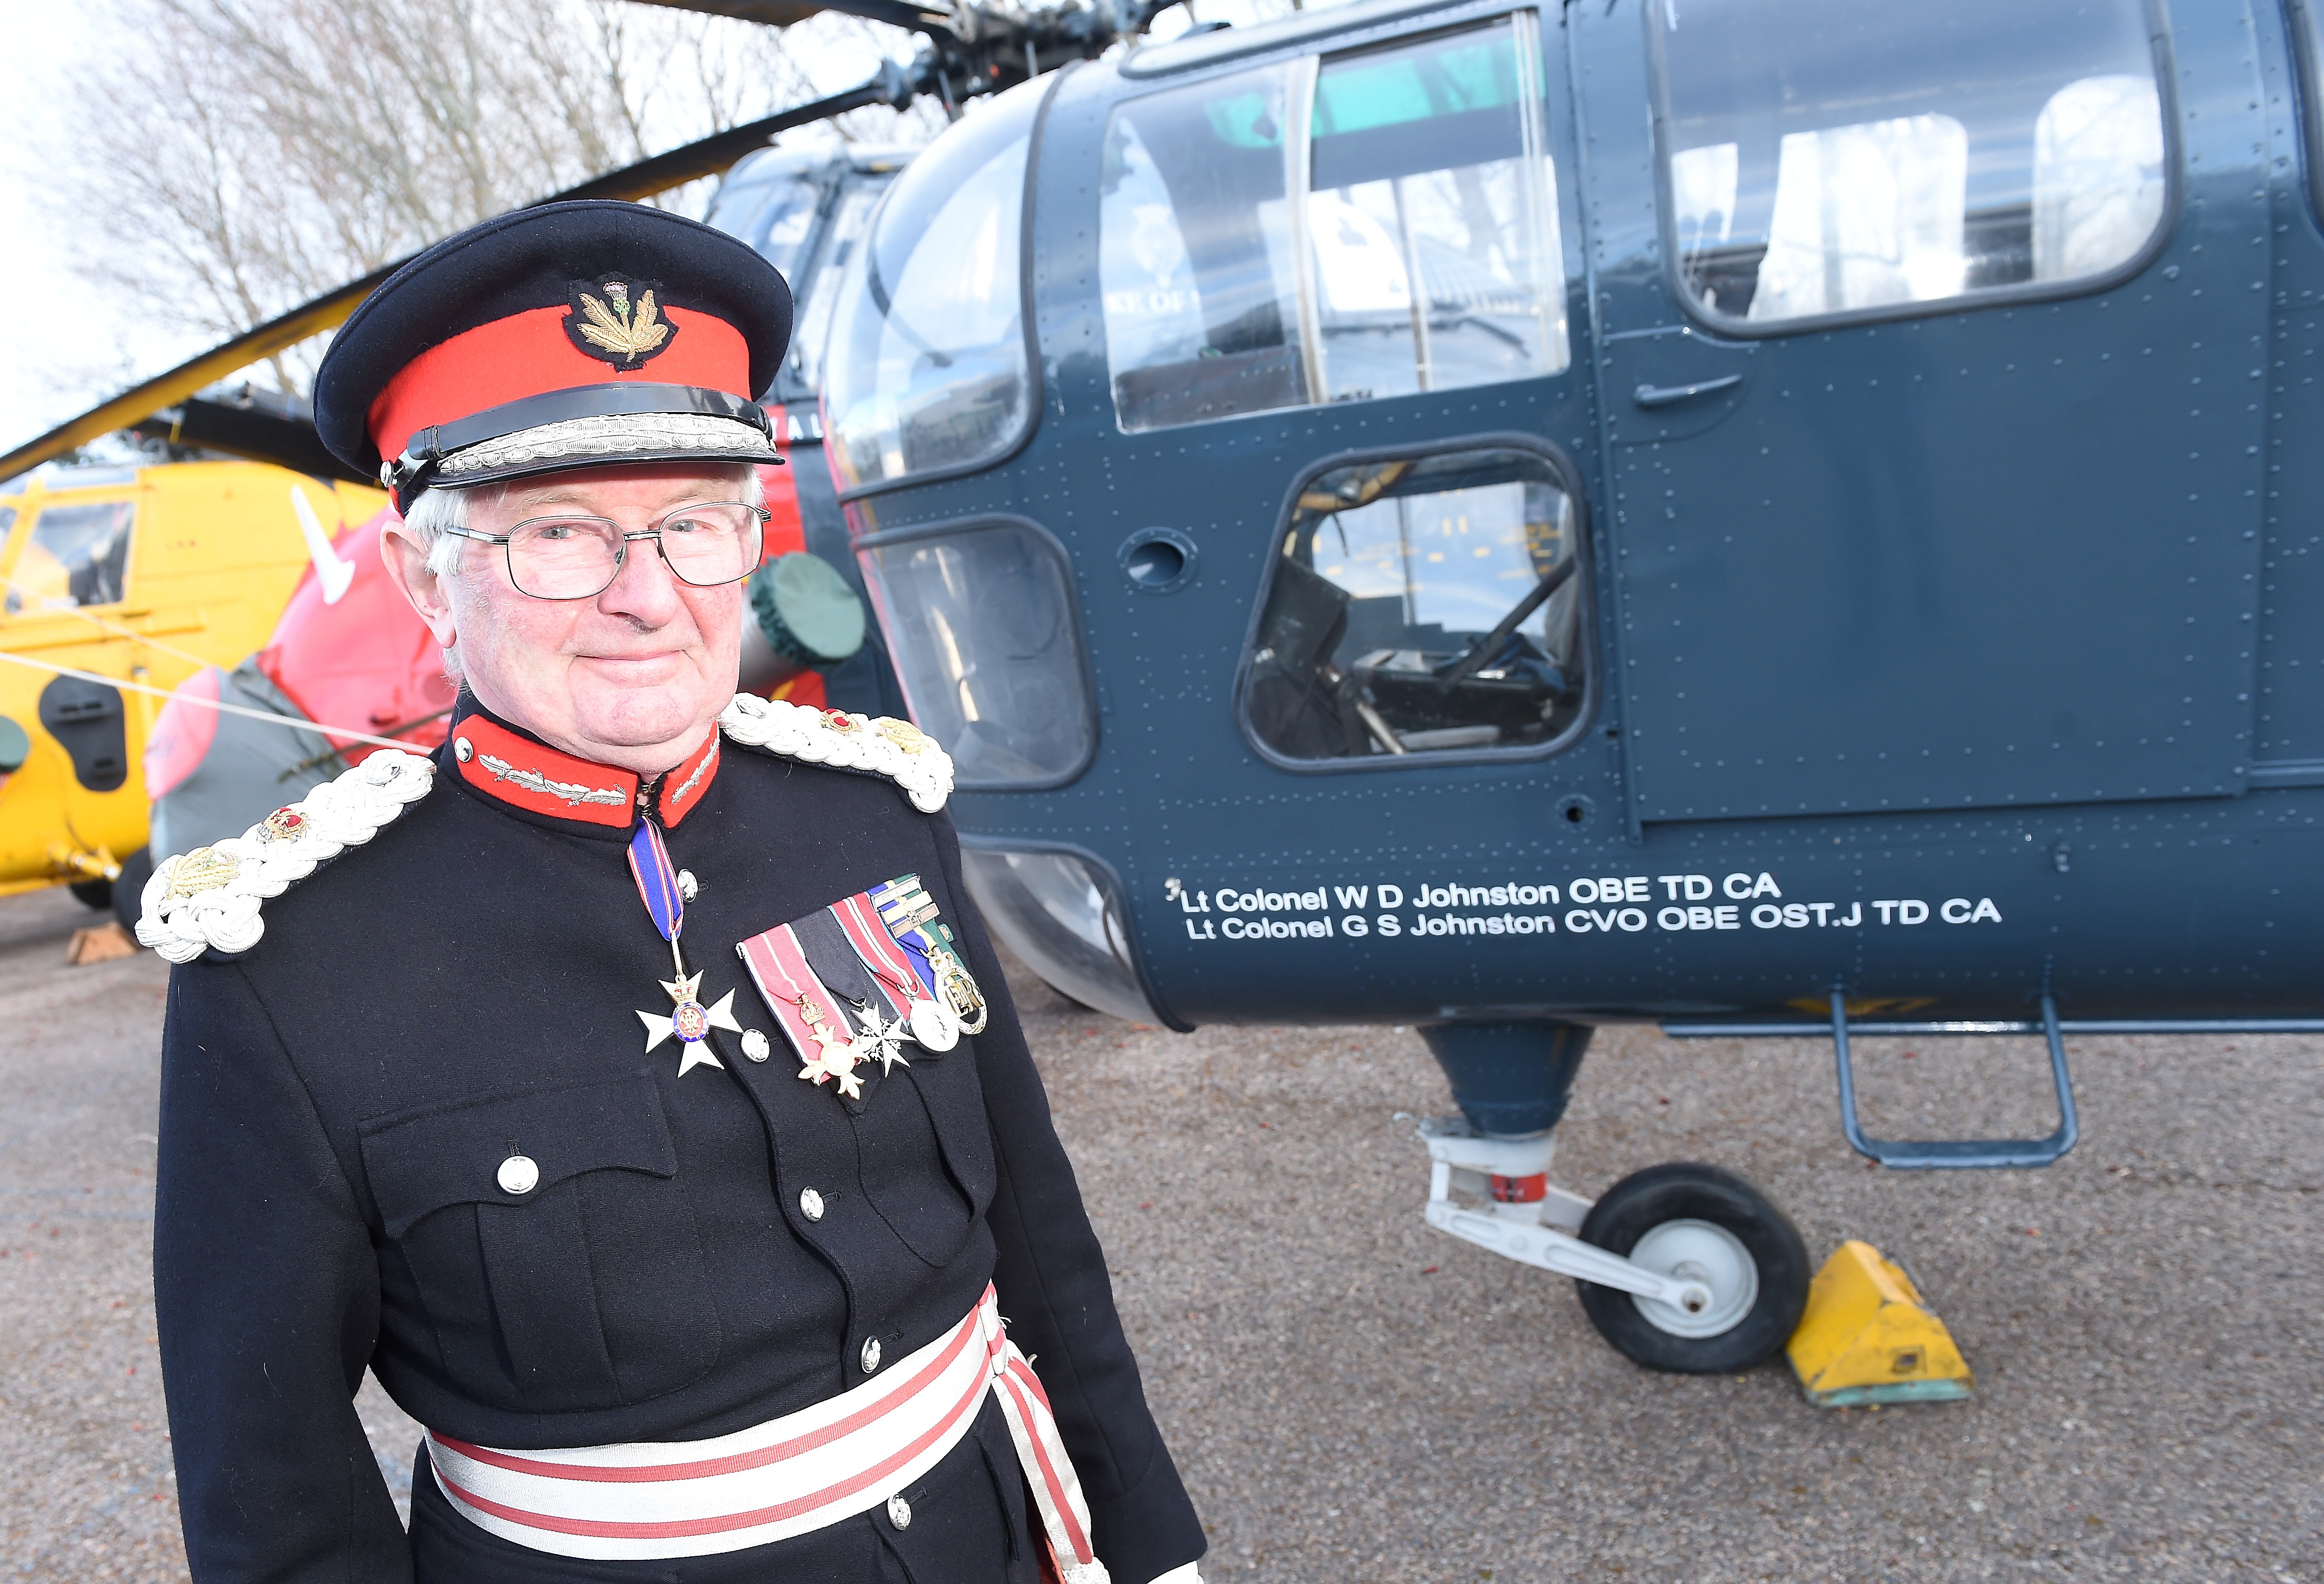 A Dragonfly helicopter at Morayvia has been christened by Moray Lord Lieutenant Grenville Johnston in honour of his father, Lt Col William Johnston.